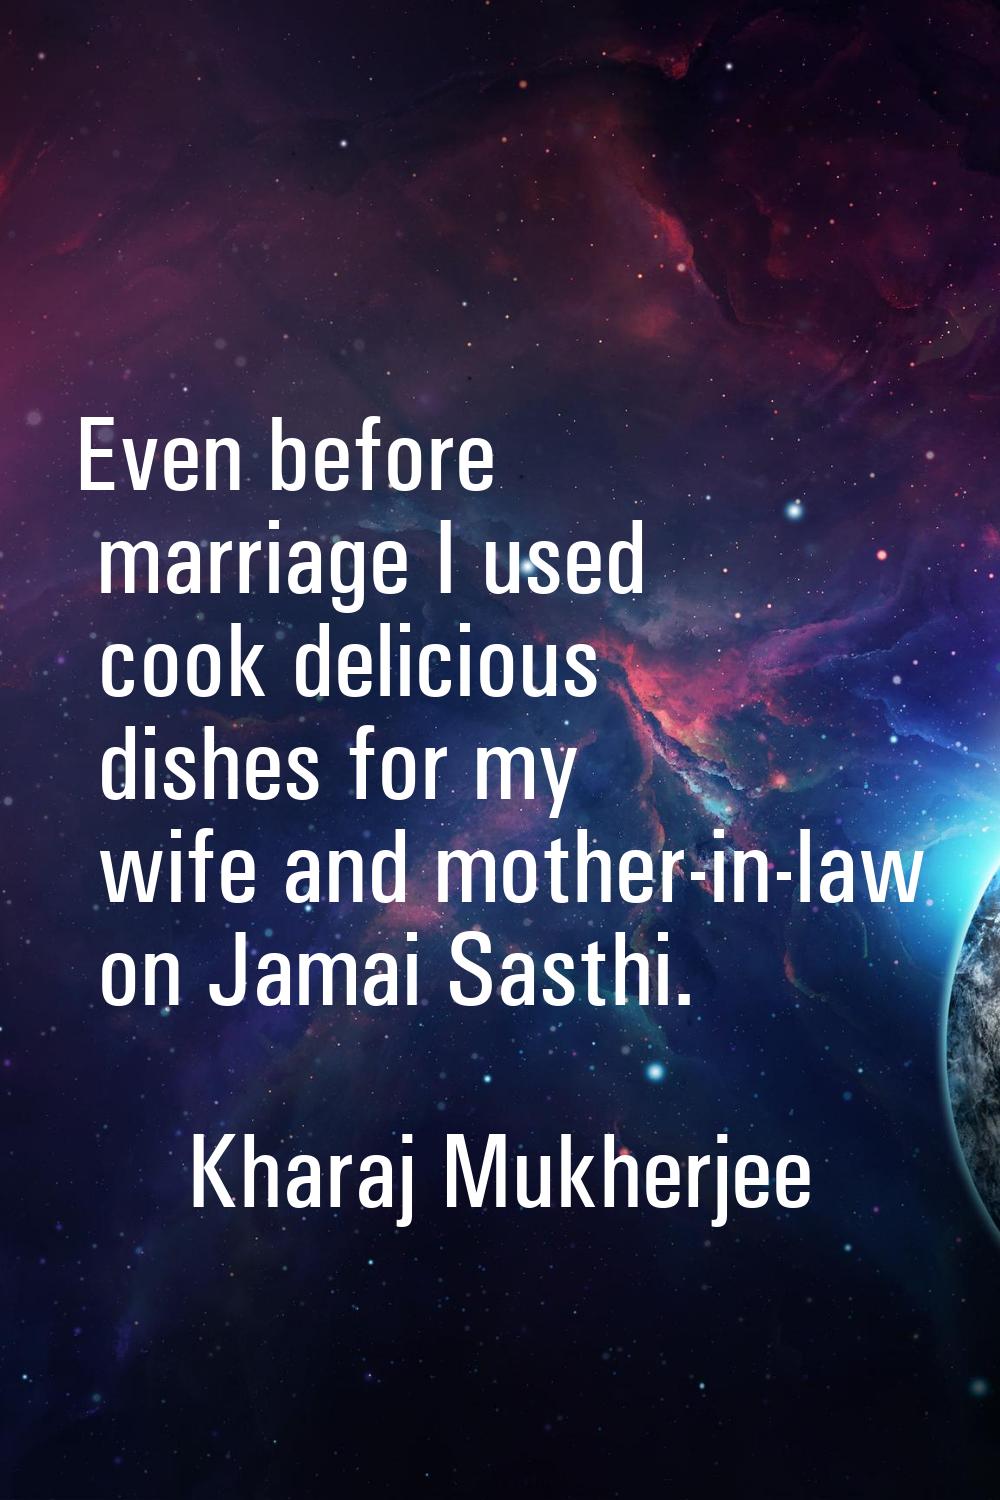 Even before marriage I used cook delicious dishes for my wife and mother-in-law on Jamai Sasthi.